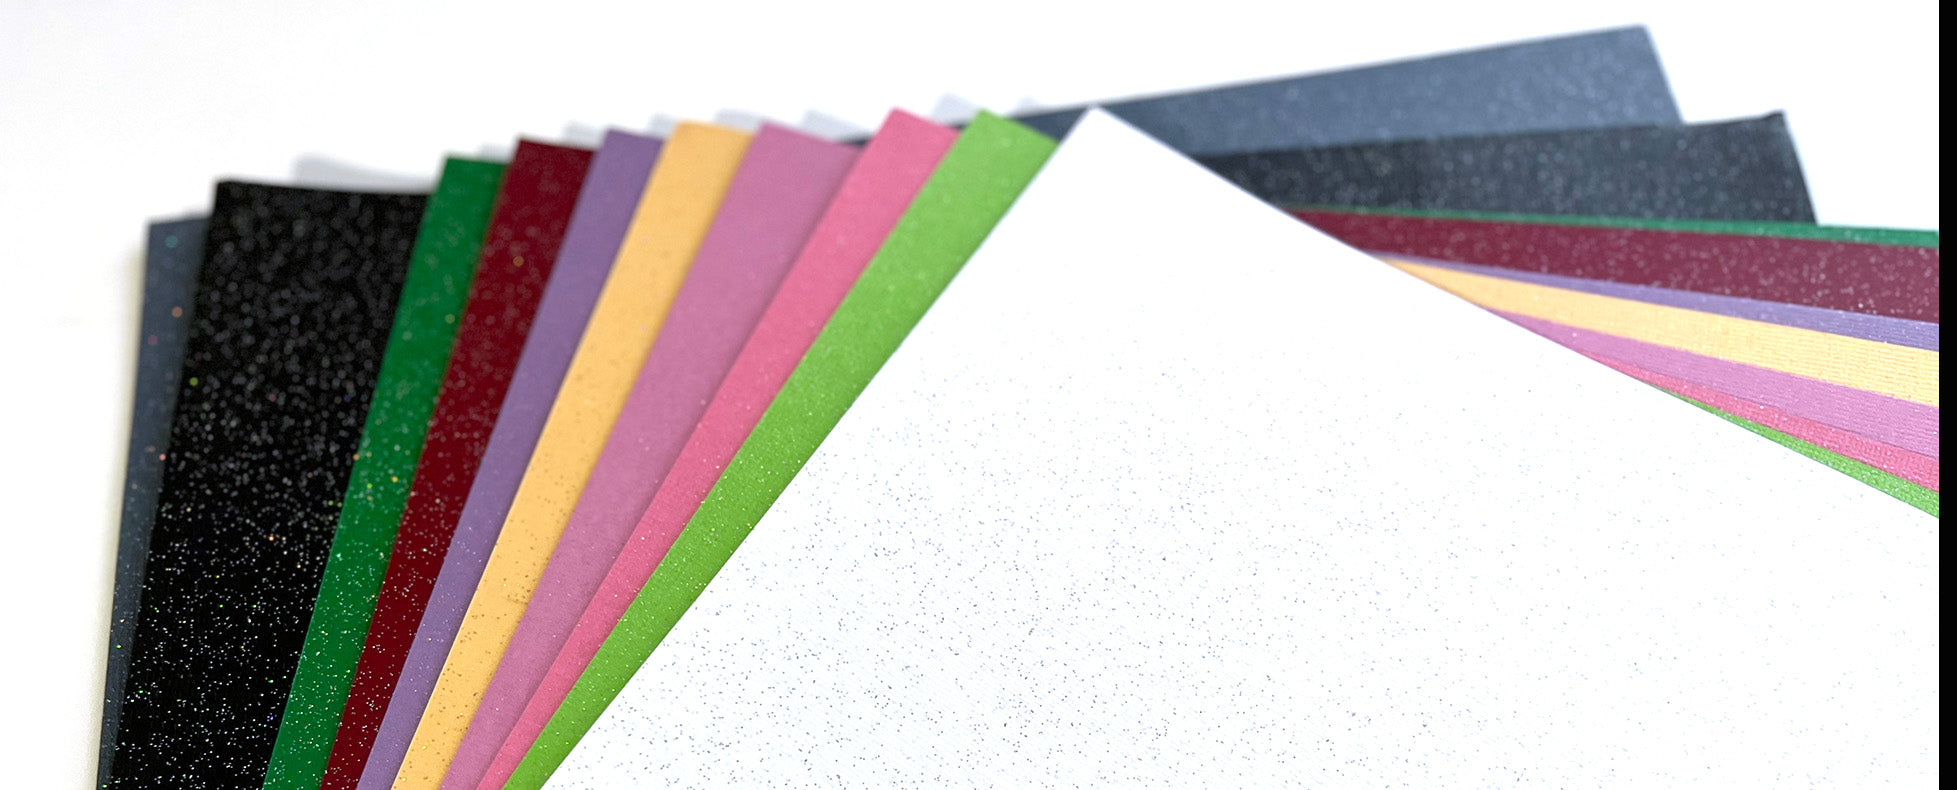 9 x 6 Assorted Color Construction Paper, 64 Sheets